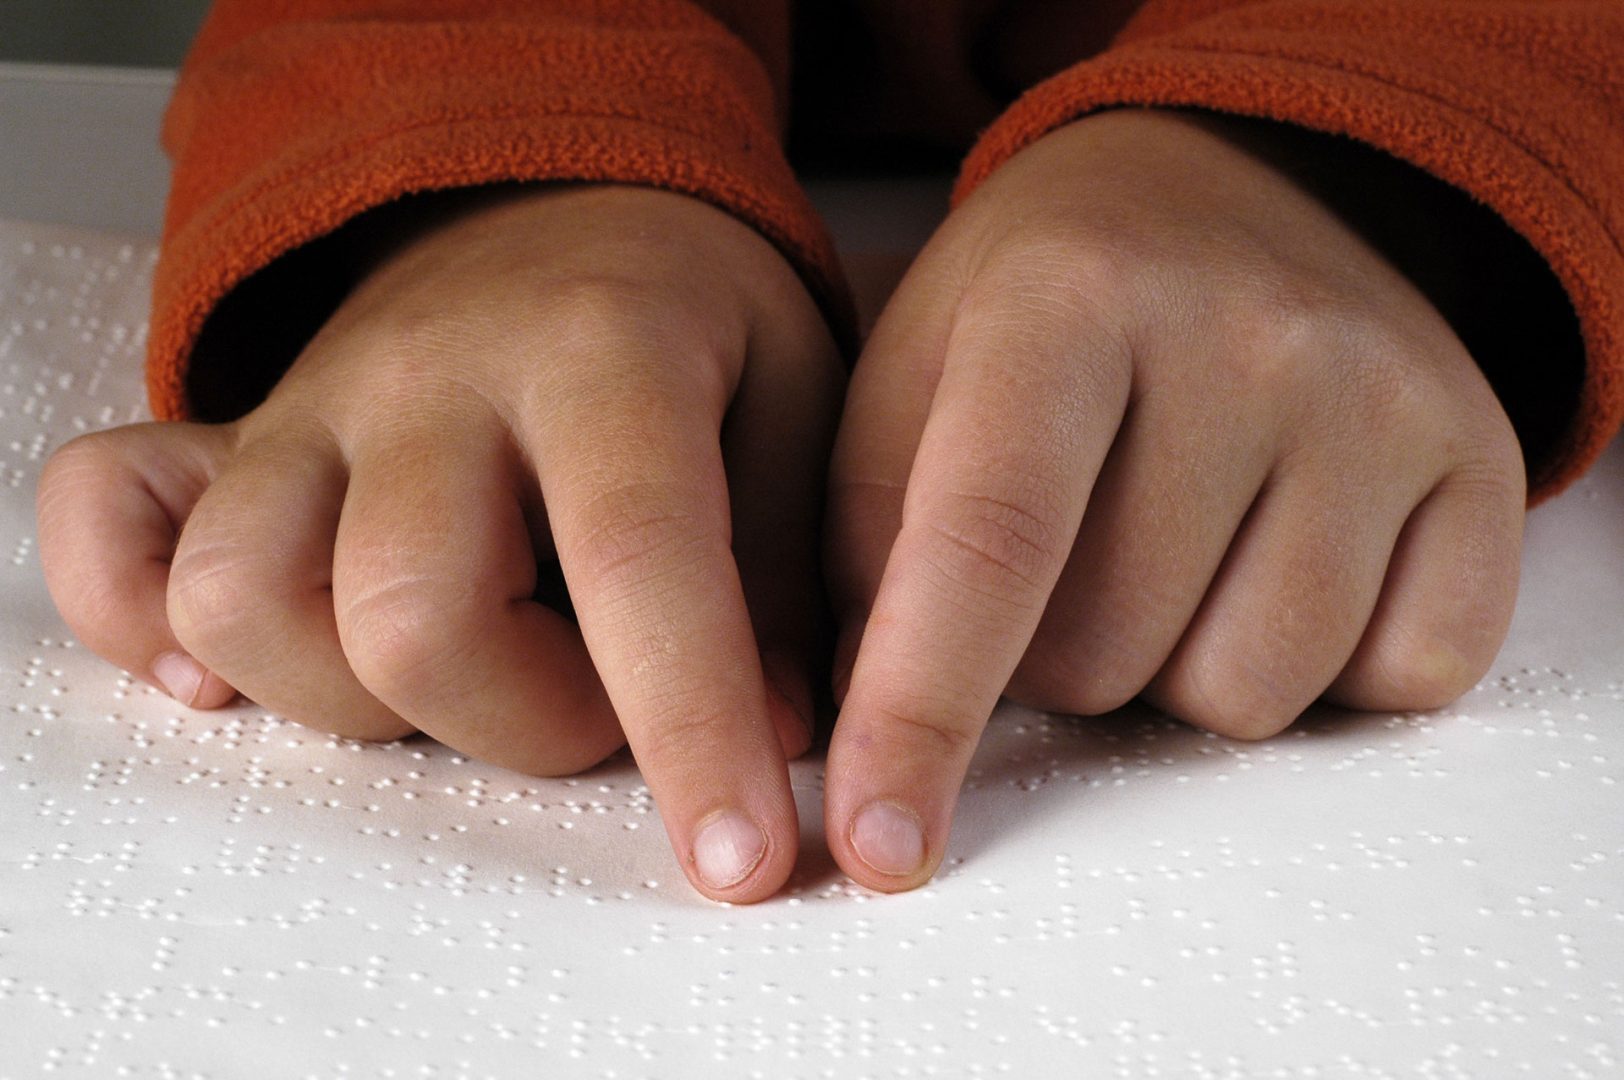 A child's hands with index fingers extended on a braille page.